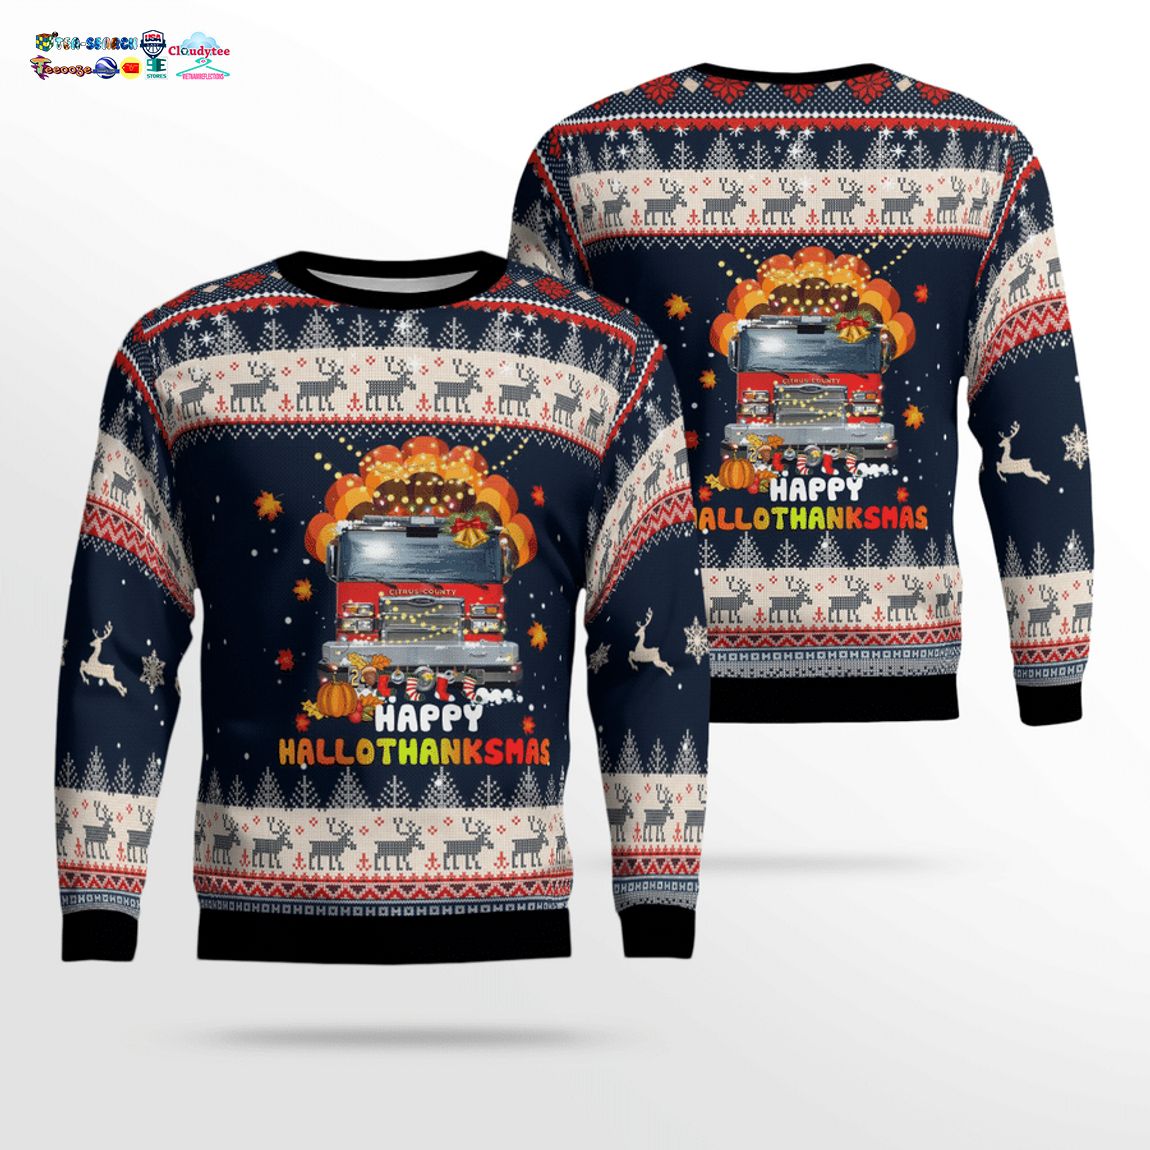 Citrus County Fire Rescue 3D Christmas Sweater - Great, I liked it